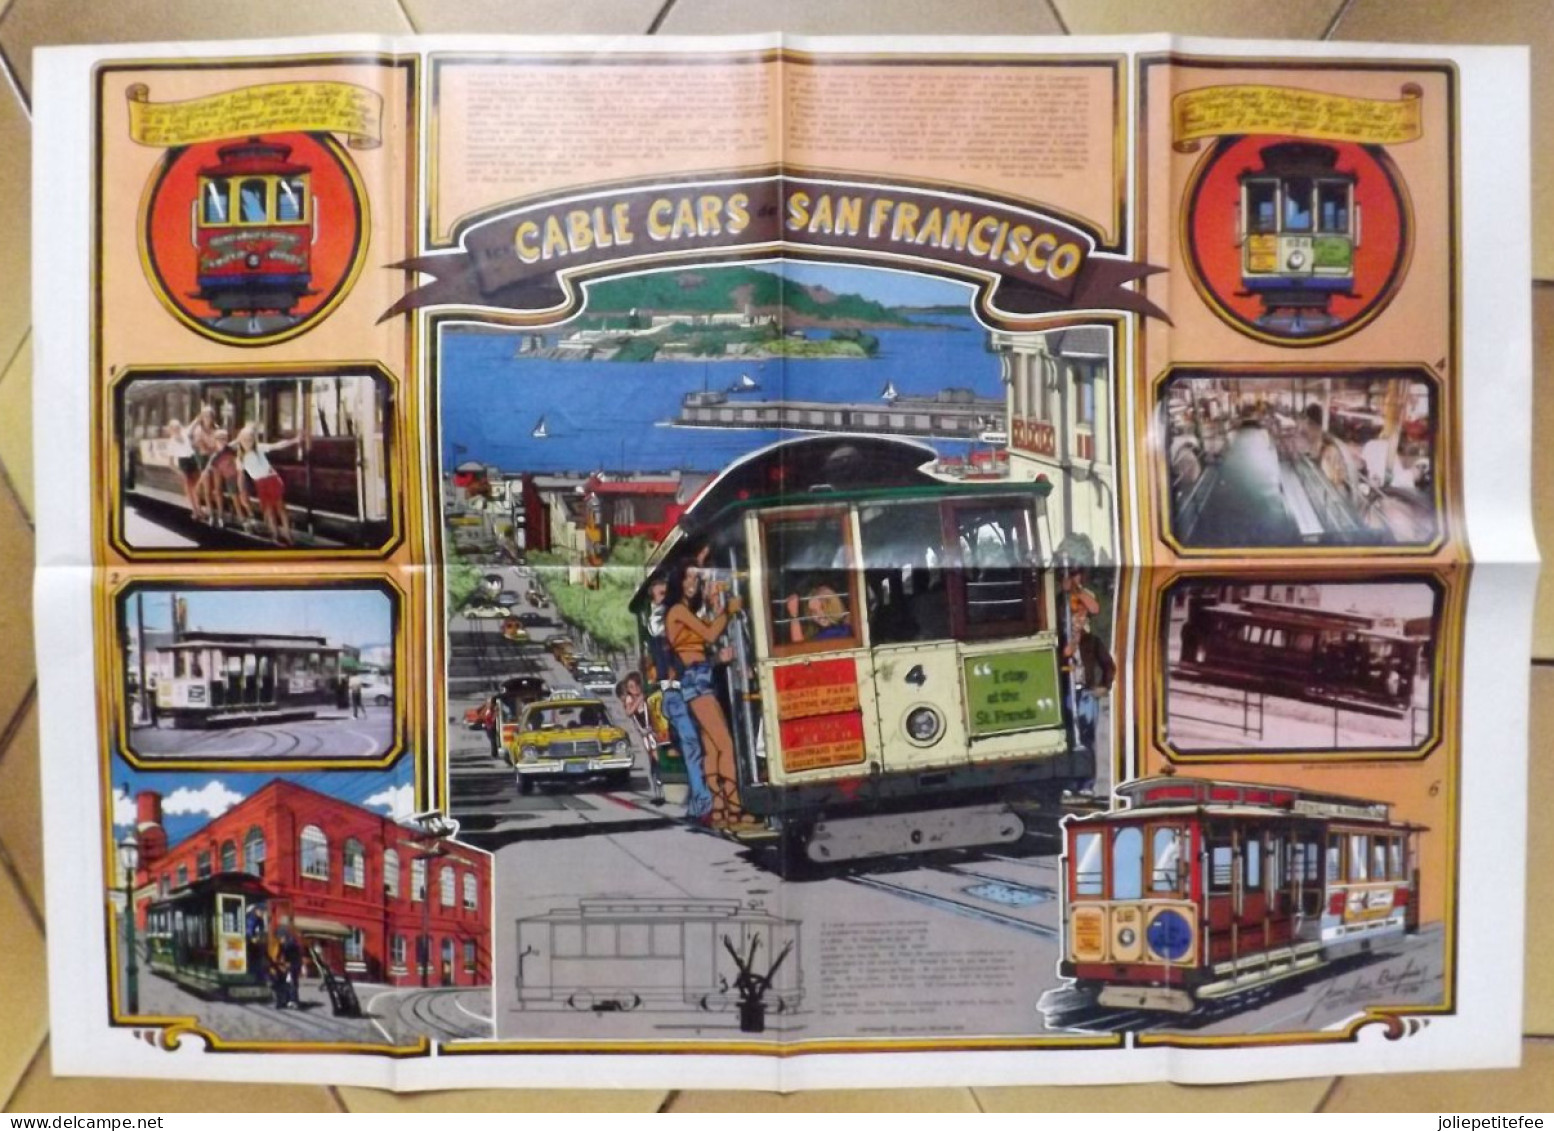 Maxi Poster.  " CABLE CARS SAN FRANCISCO "   Jean Luc BEGHIN.  1978. - Plakate